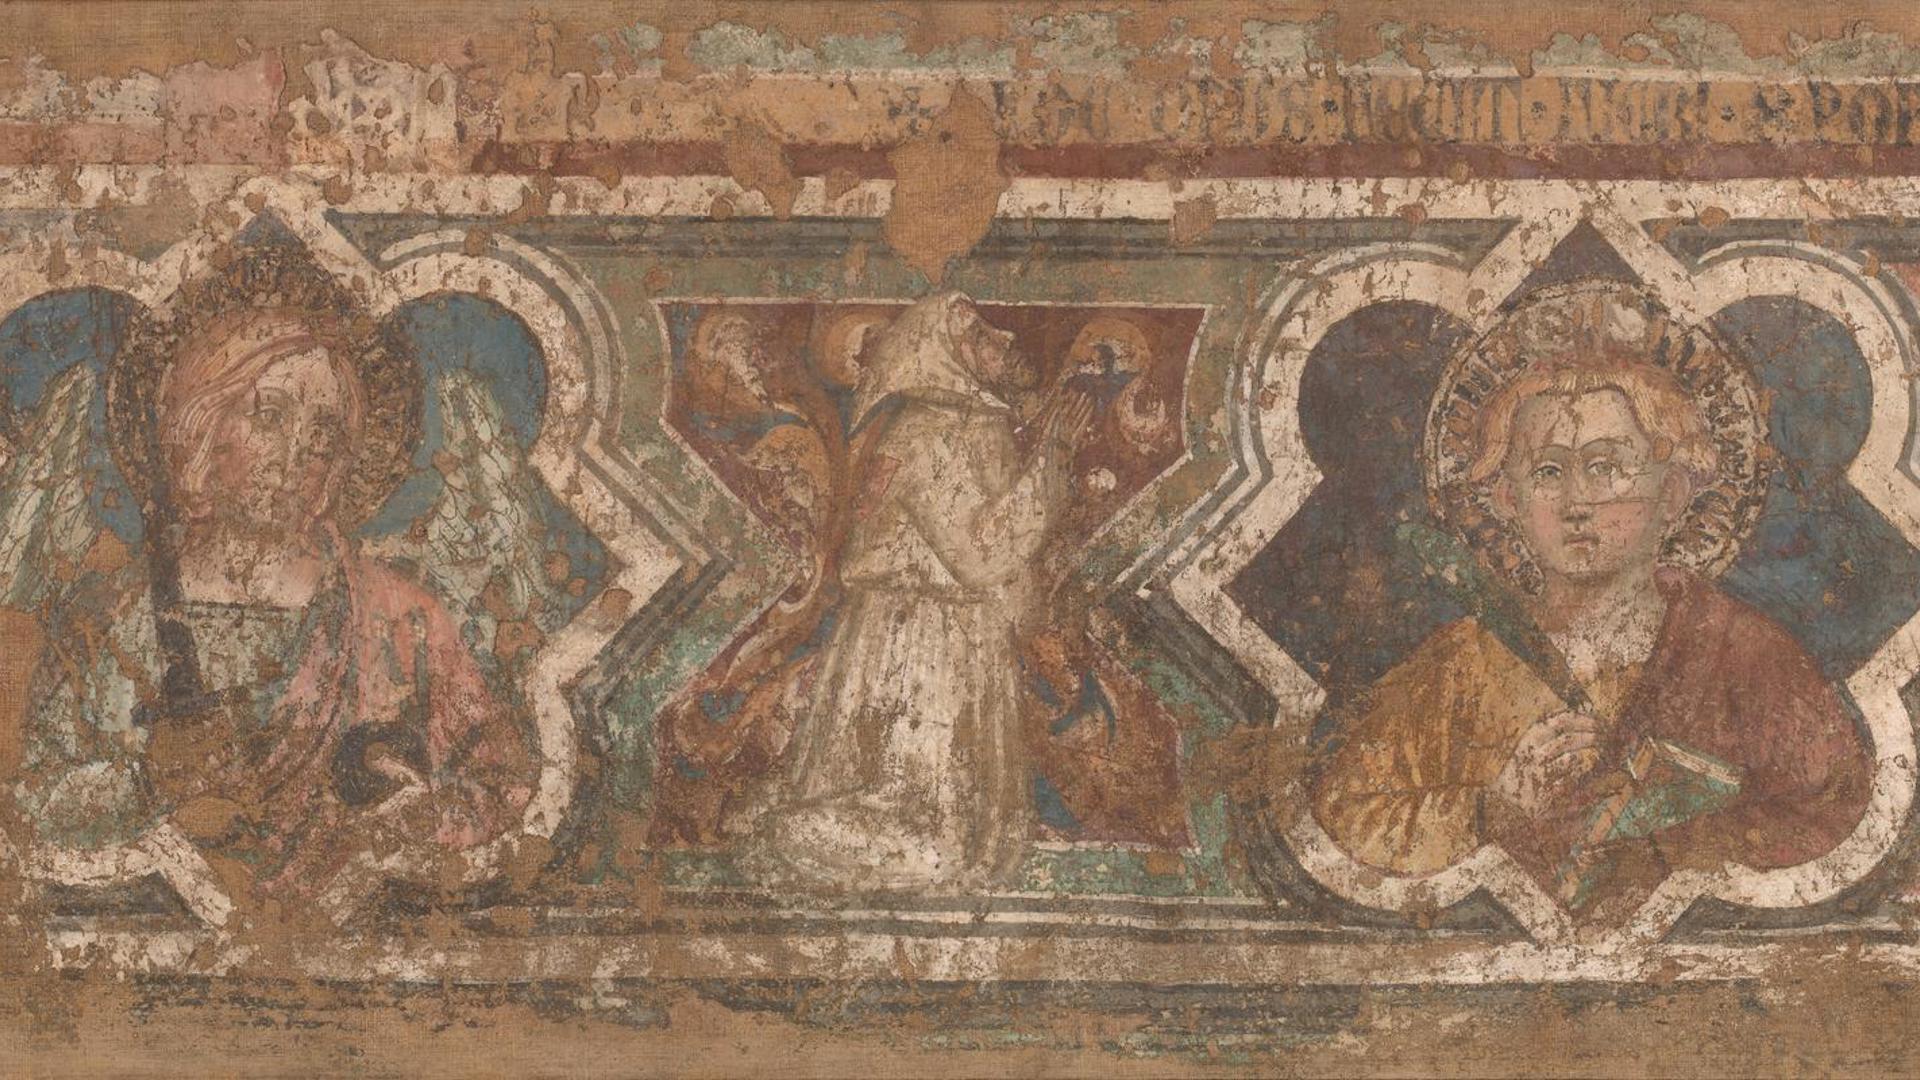 Decorative Border with a Kneeling Flagellant and Saints by Spinello Aretino